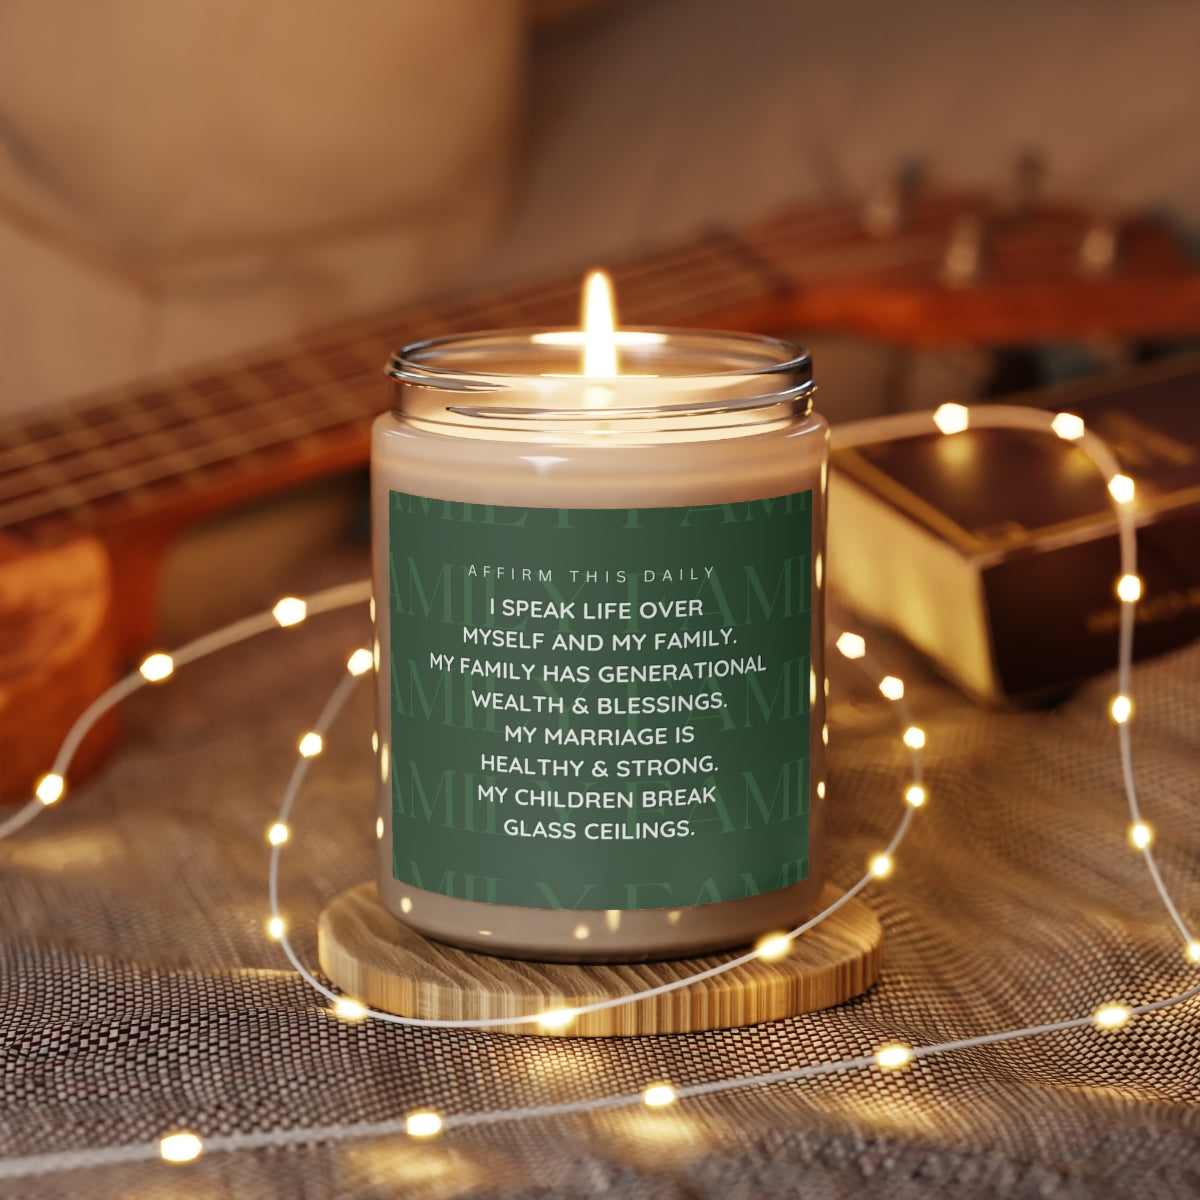 "Family" Affirmation Scented Candle, 9oz